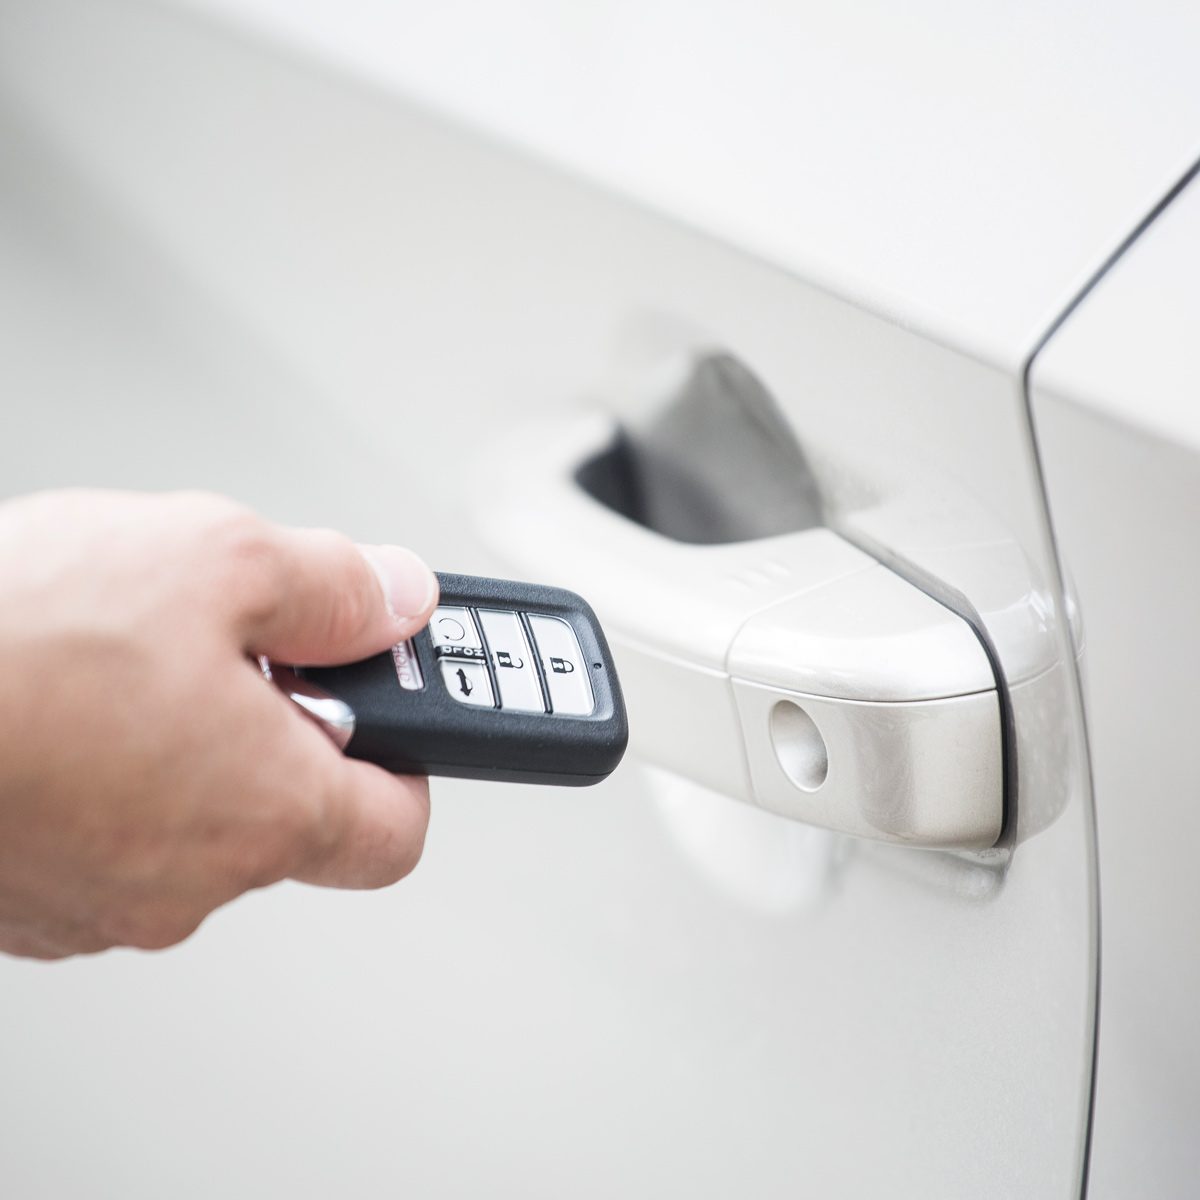 Does Wrapping Your Car Key Fob in Foil Really Help Deter Thieves?